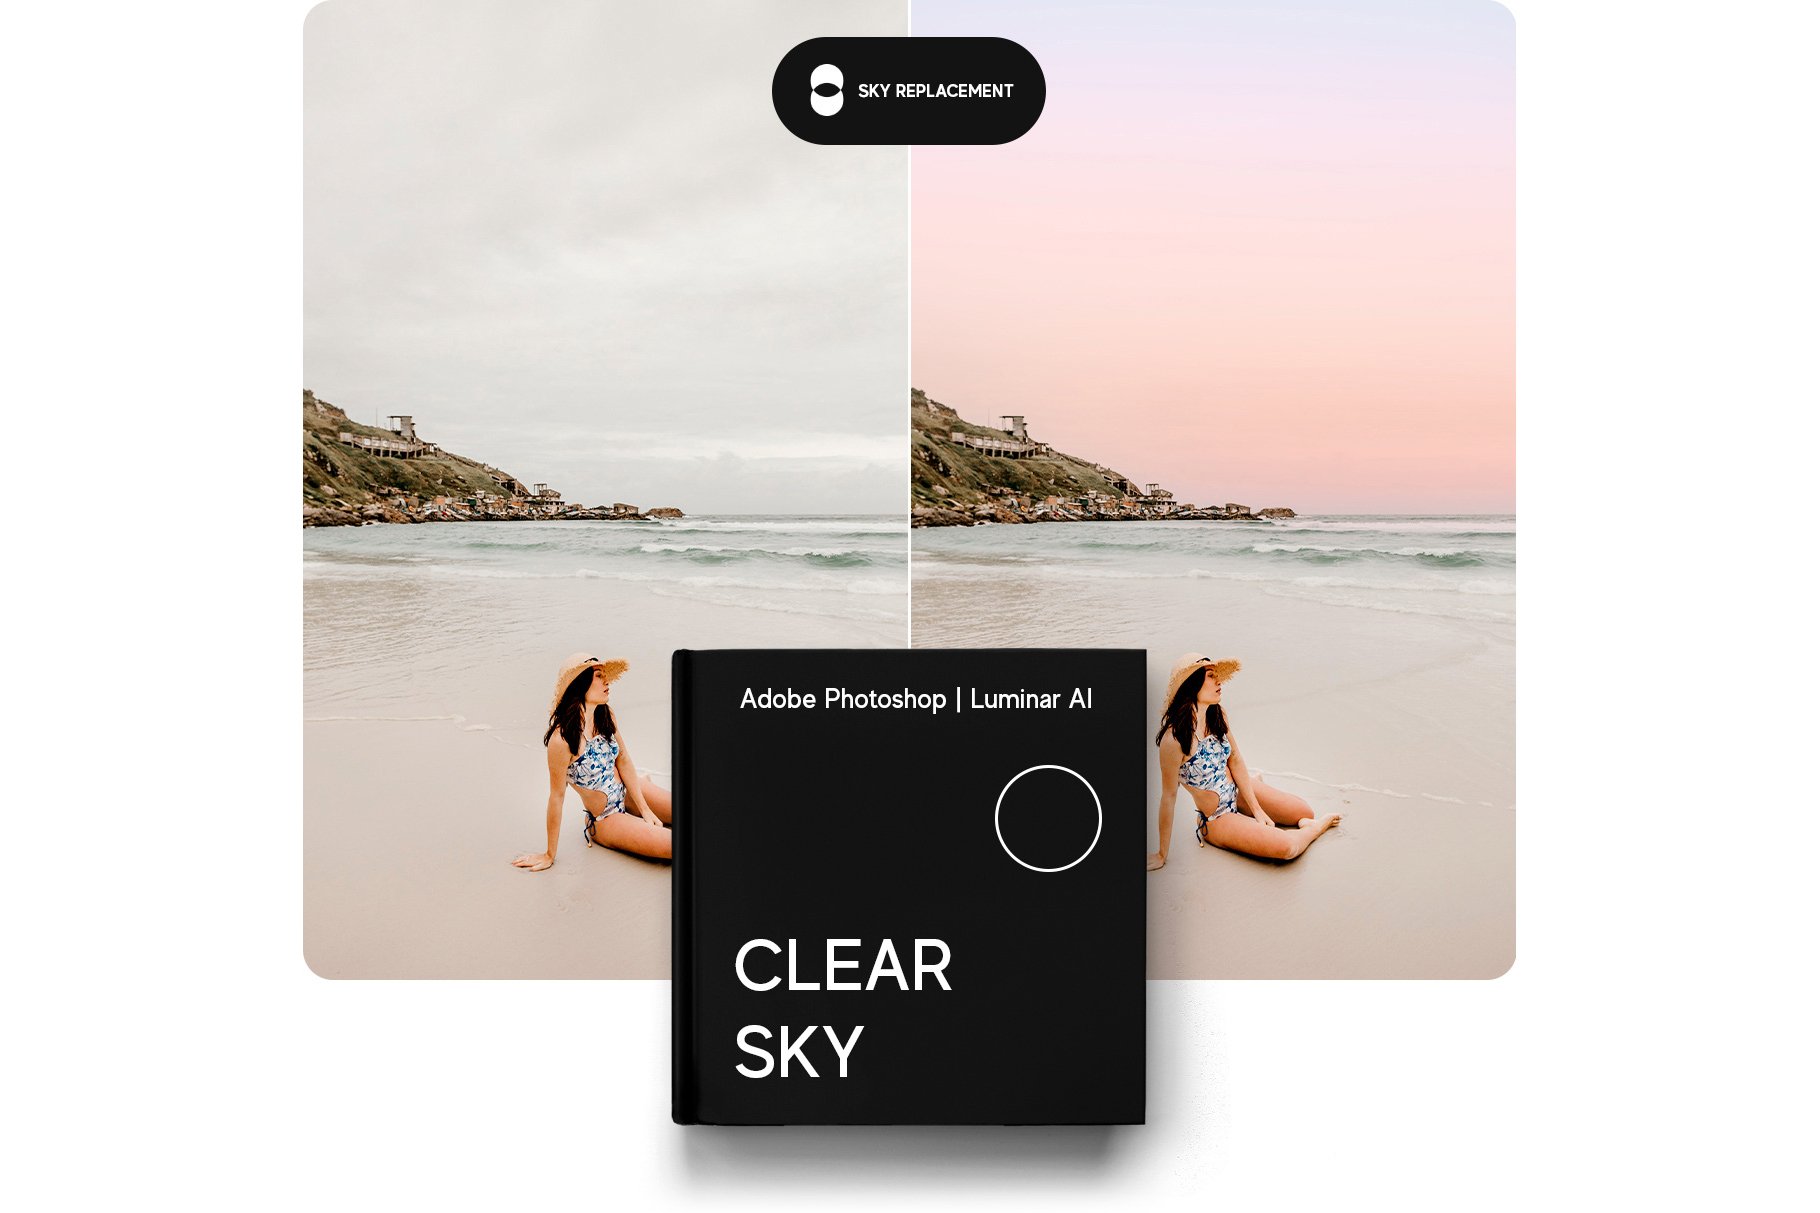 Clear Sky Replacement Packcover image.